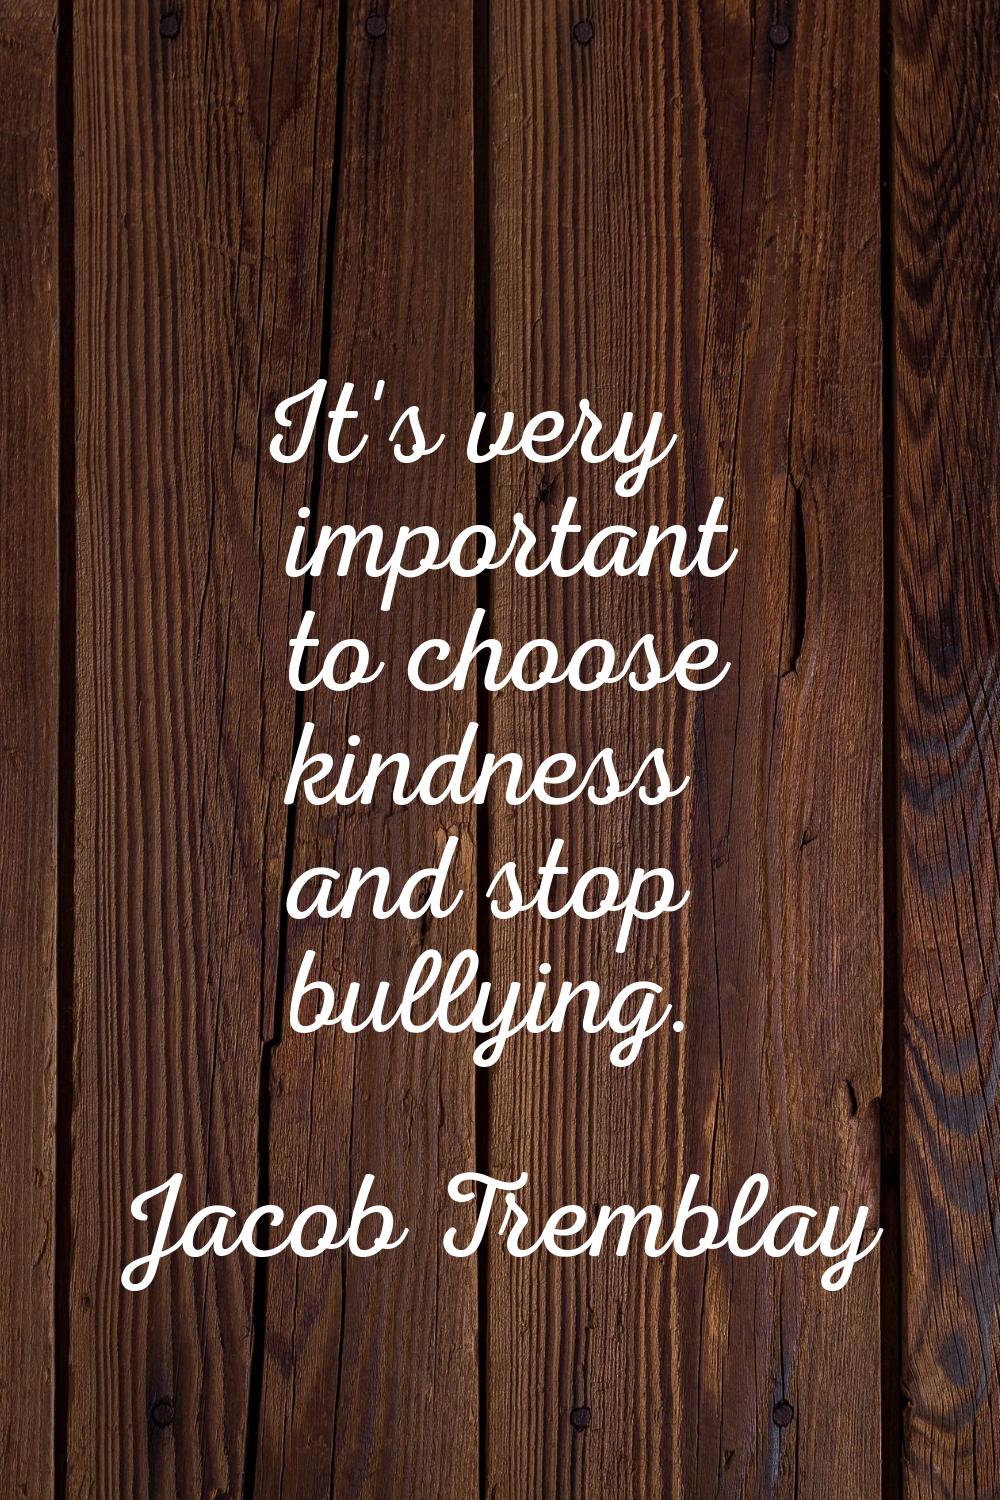 It's very important to choose kindness and stop bullying.